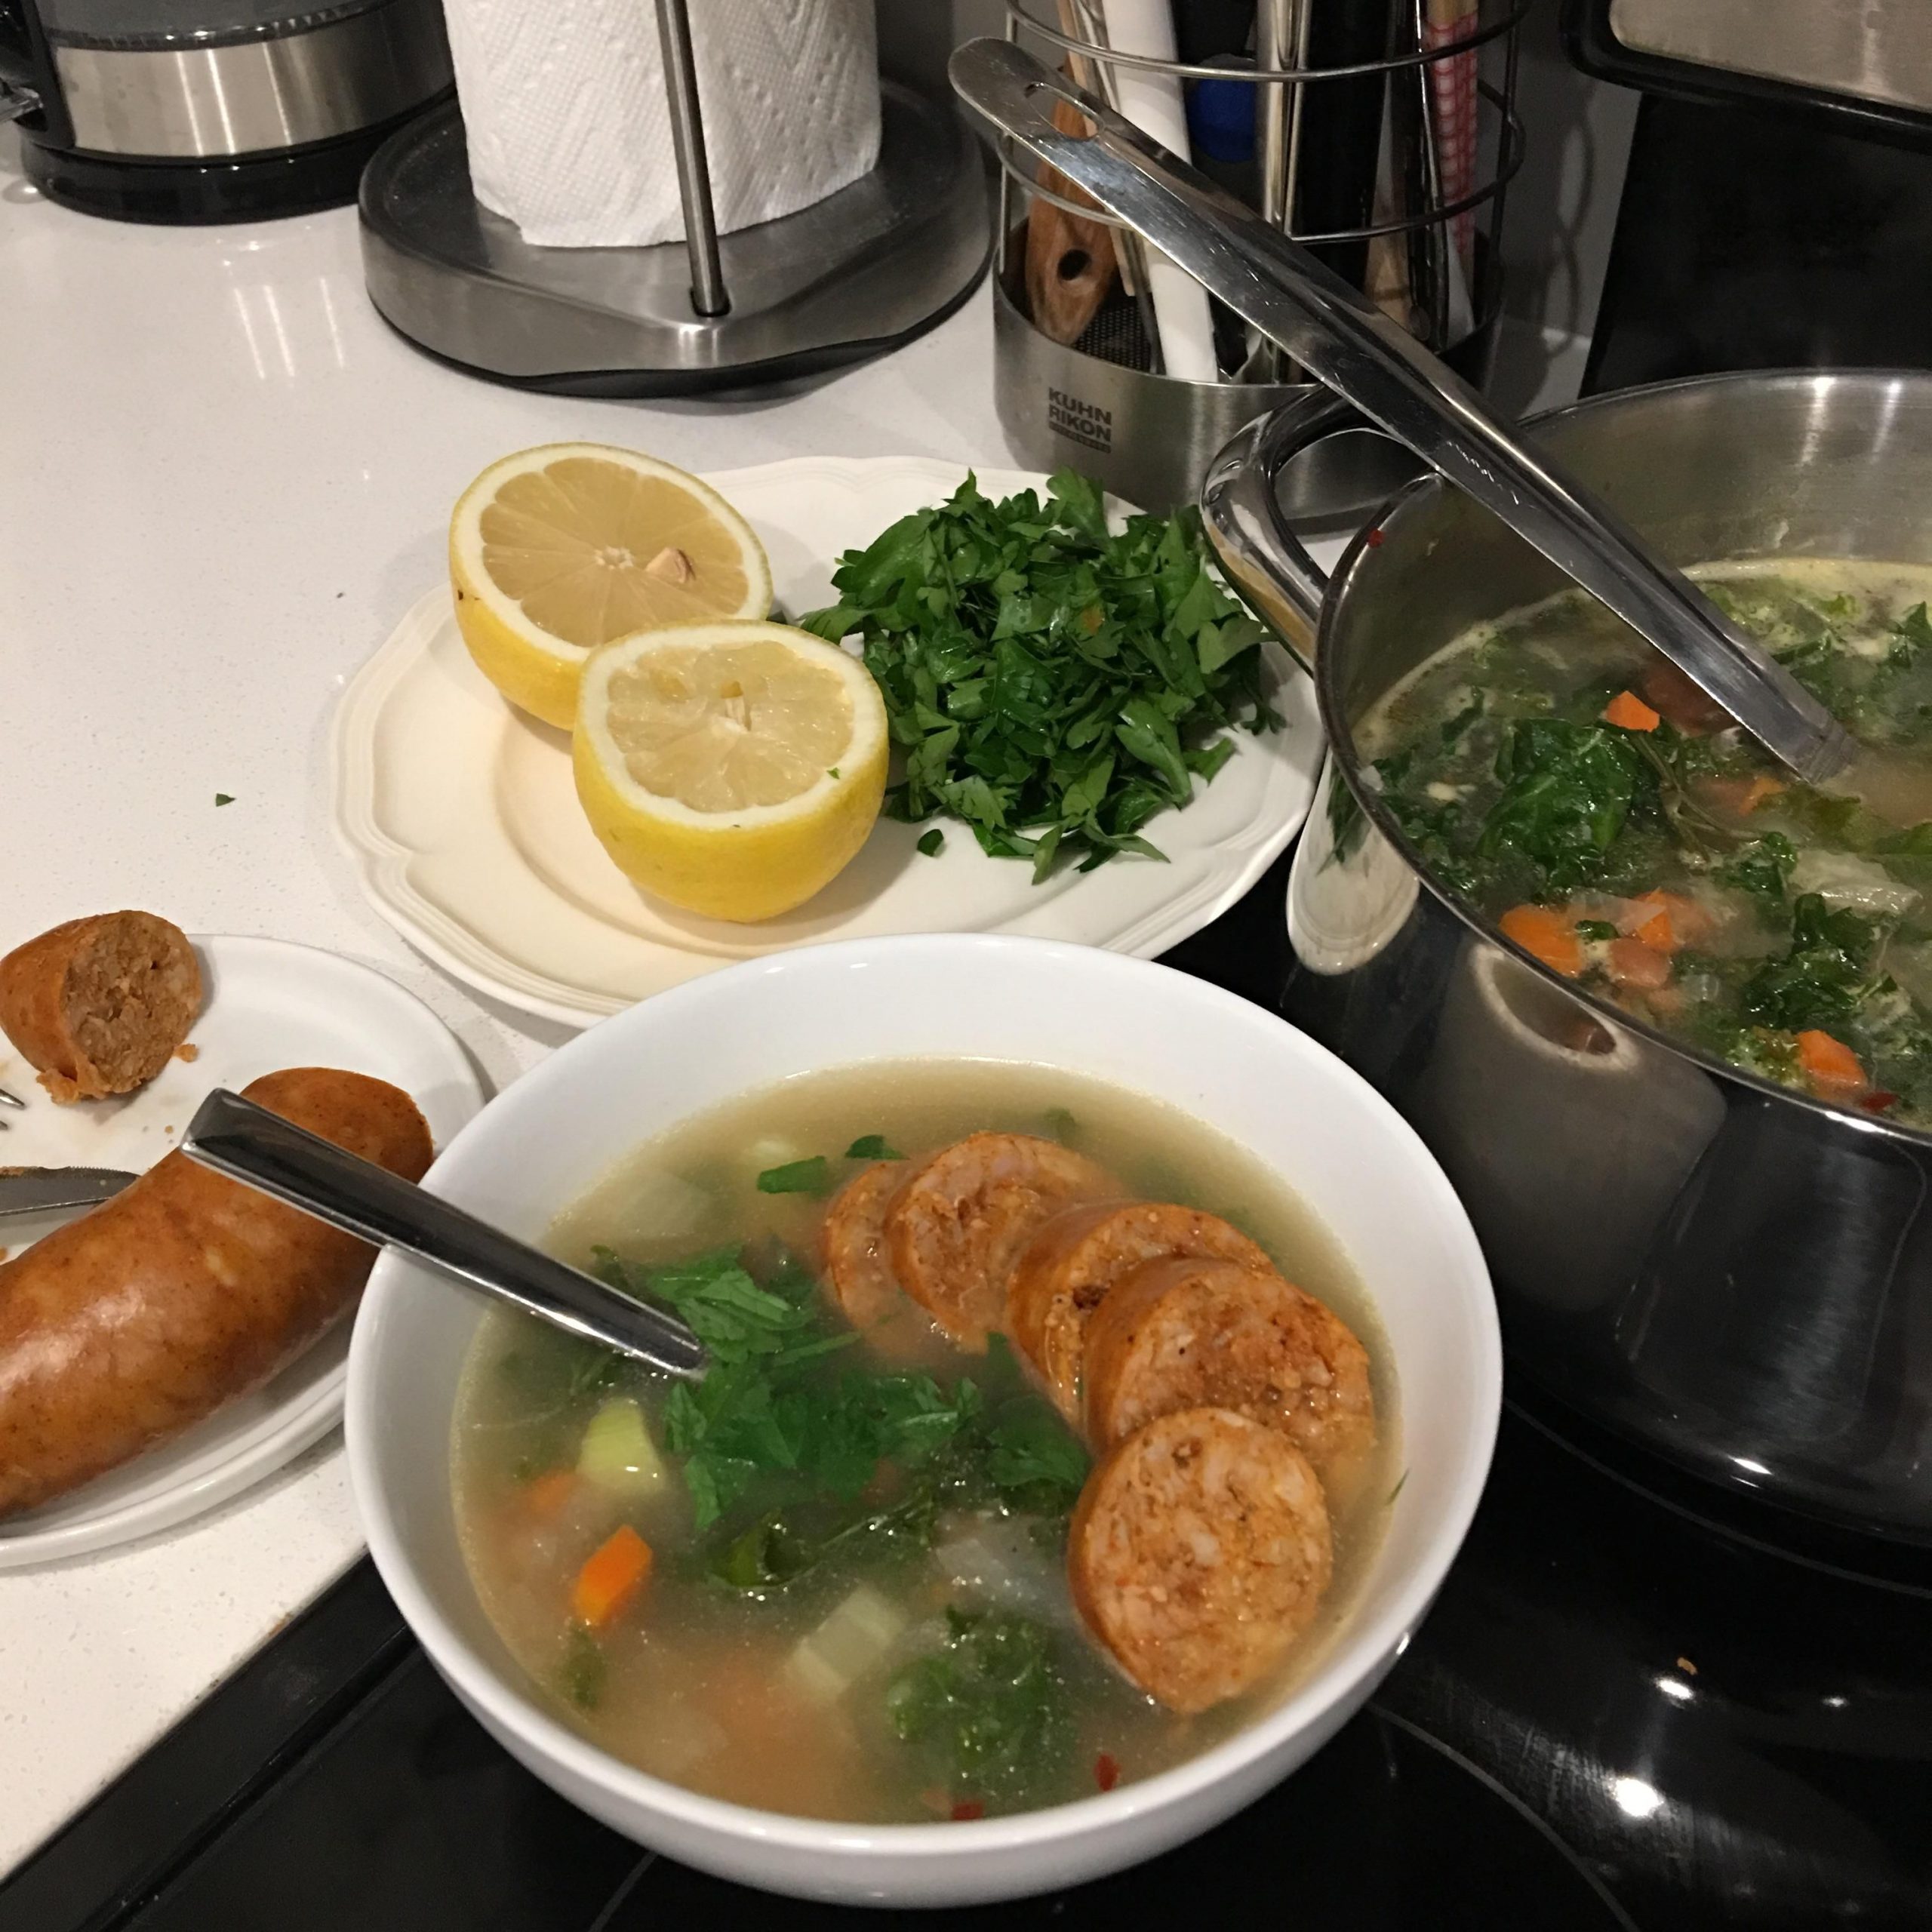 [Homemade] white bean soup with kale rosemary and lemon. Turkey sausage ...